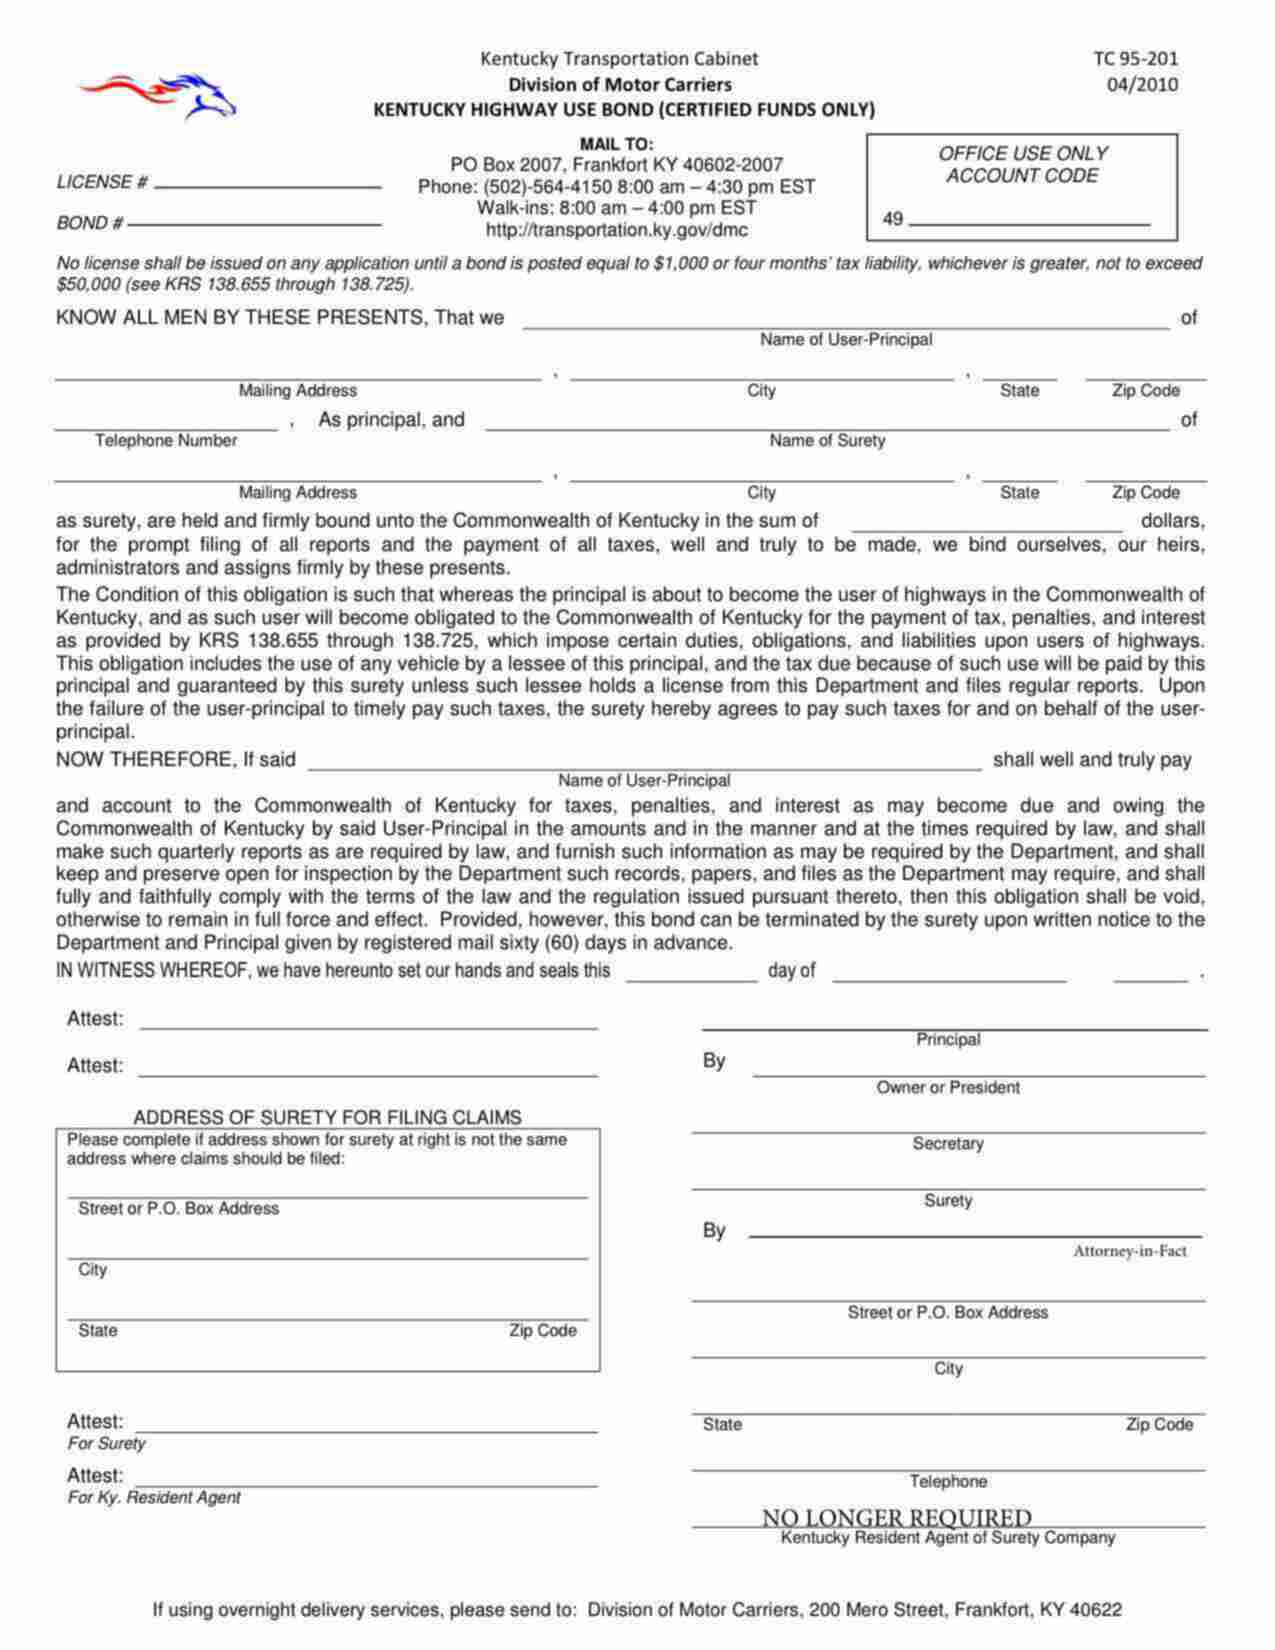 Kentucky Highway Use (Fuel Tax) NO LONGER REQUIRED Bond Form